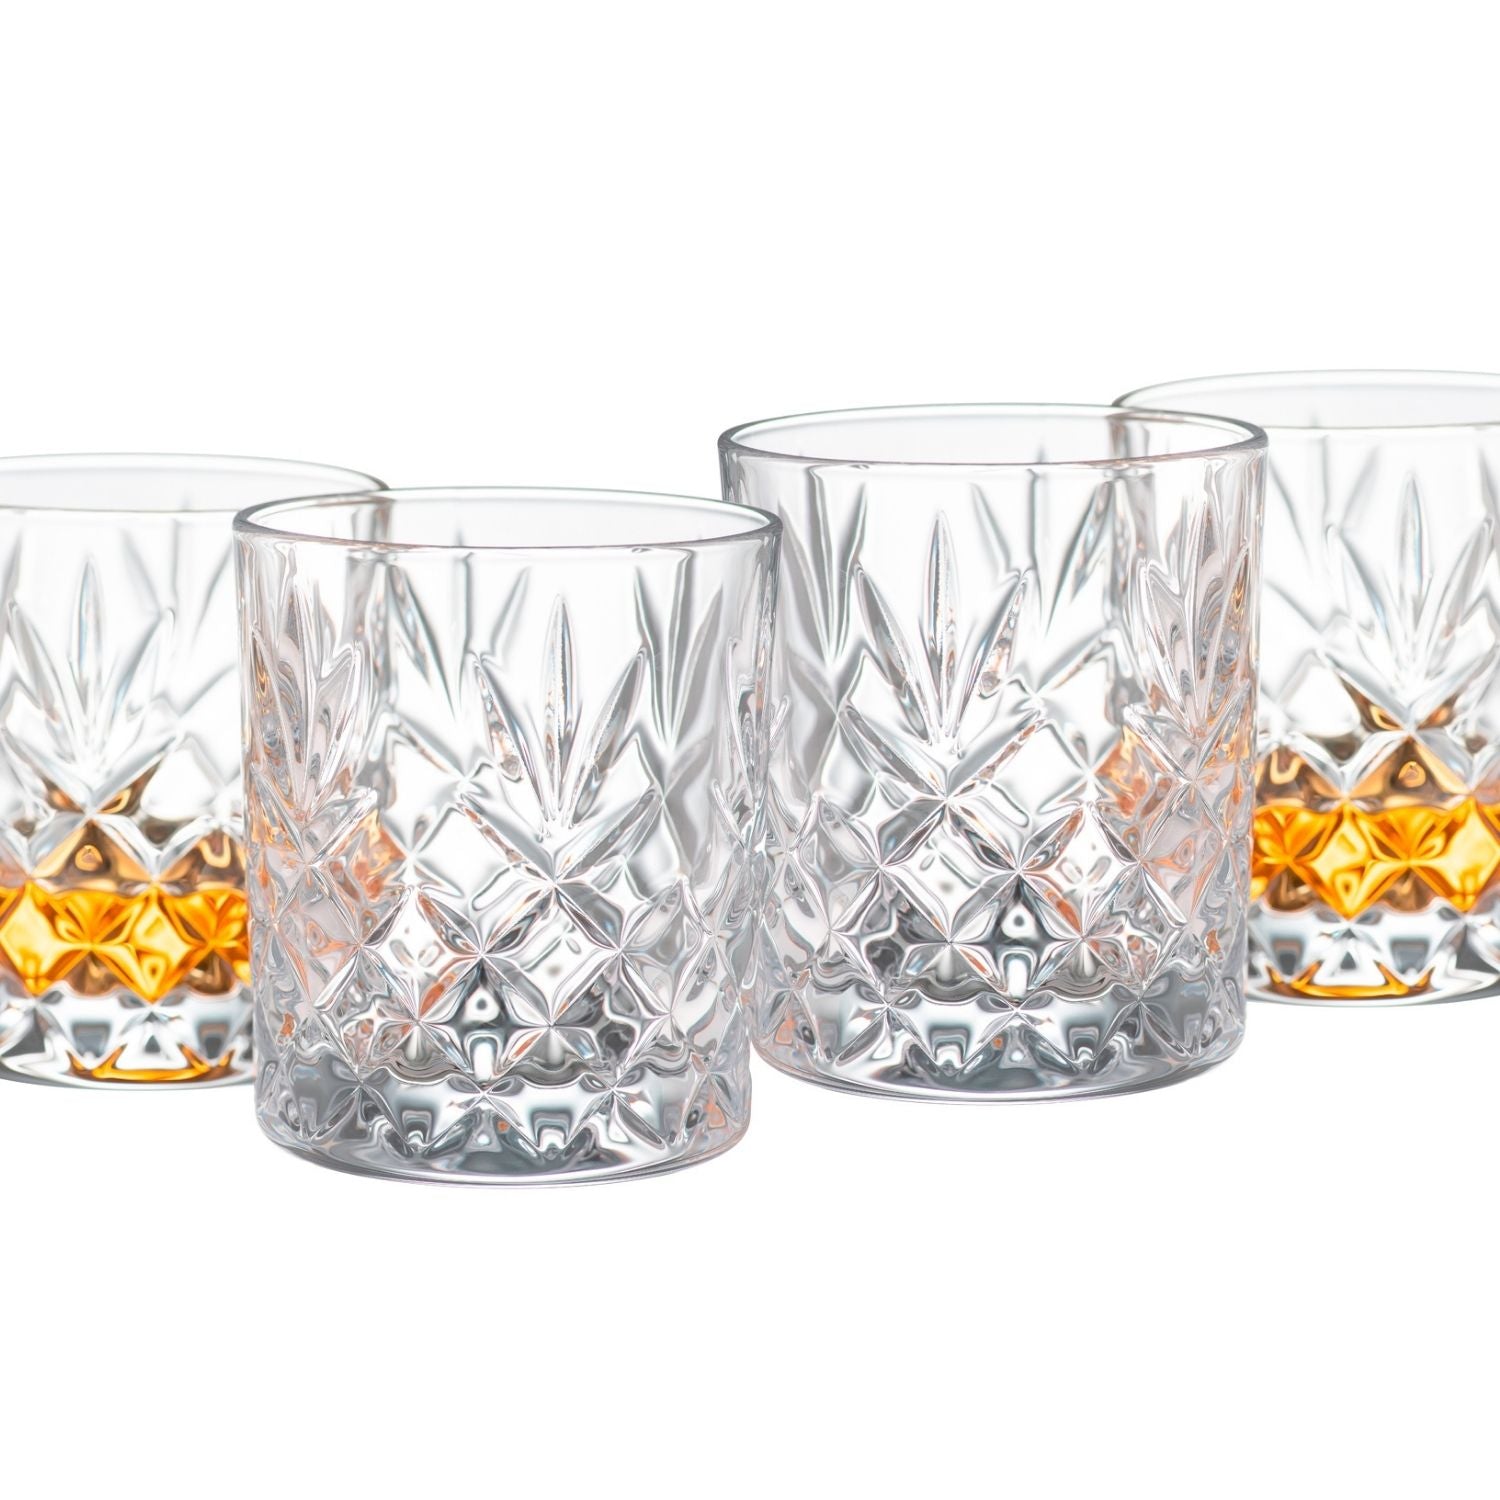 Galway Crystal Renmore Wine Goblets Set of 6